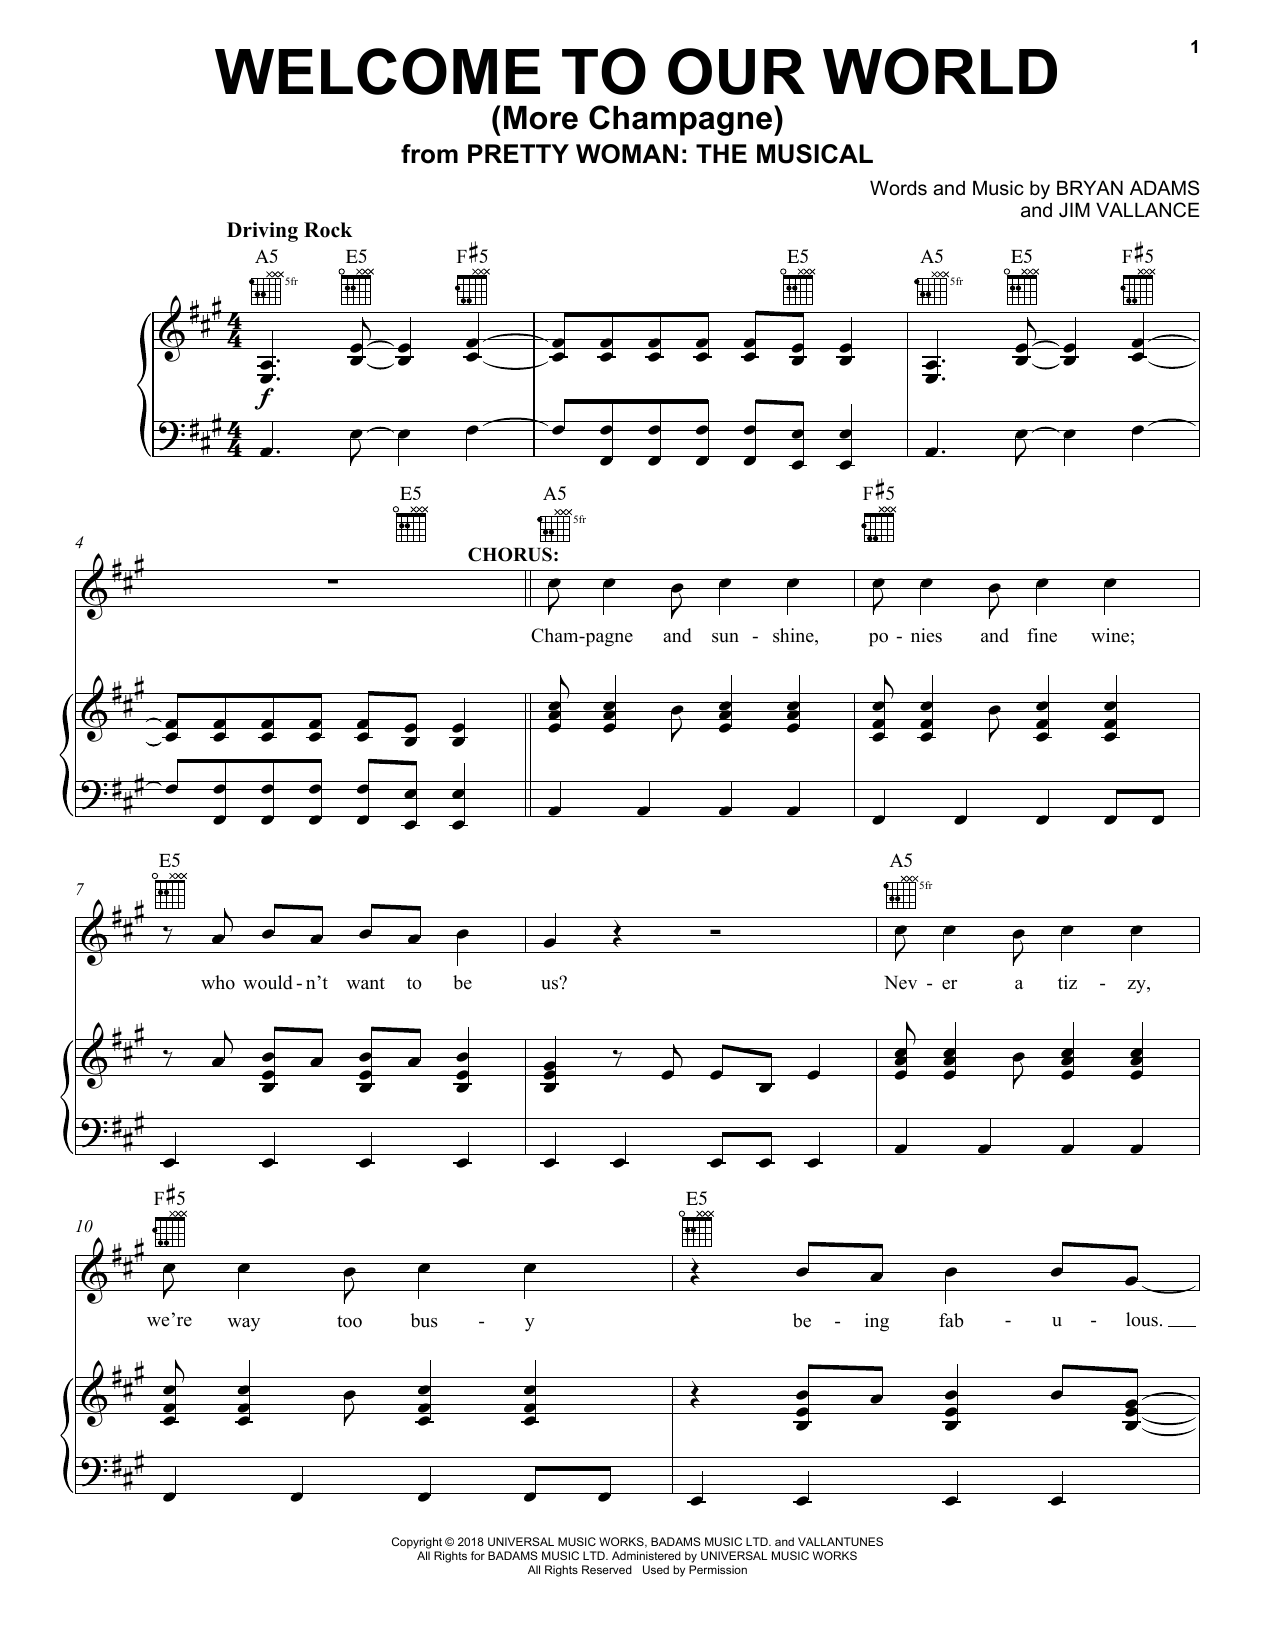 Download Bryan Adams & Jim Vallance Welcome To Our World (More Champagne) ( Sheet Music